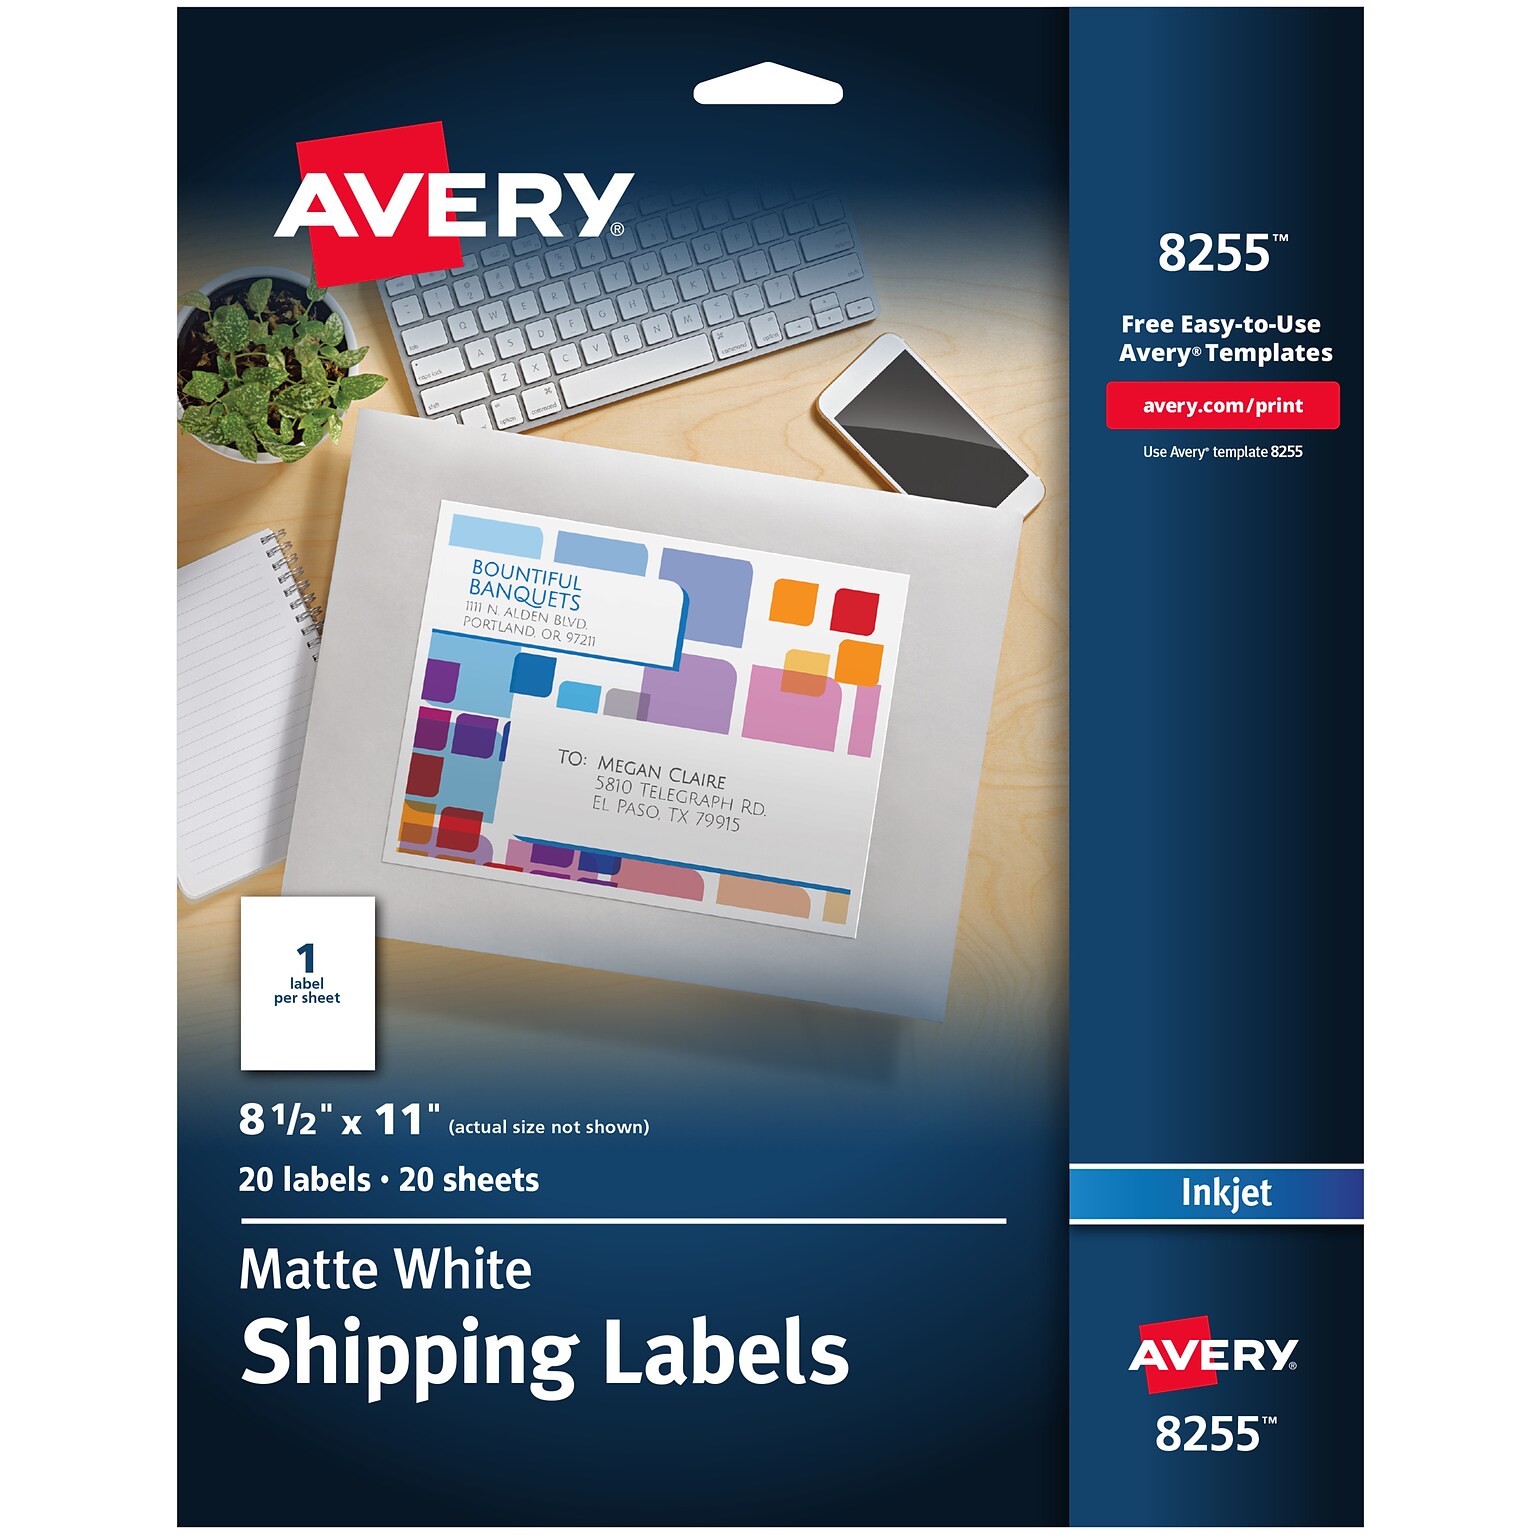 Avery Inkjet Shipping Labels, 8-1/2 x 11, White, 1 Label/Sheet, 20 Sheets/Pack, 20 Labels/Pack (8255)